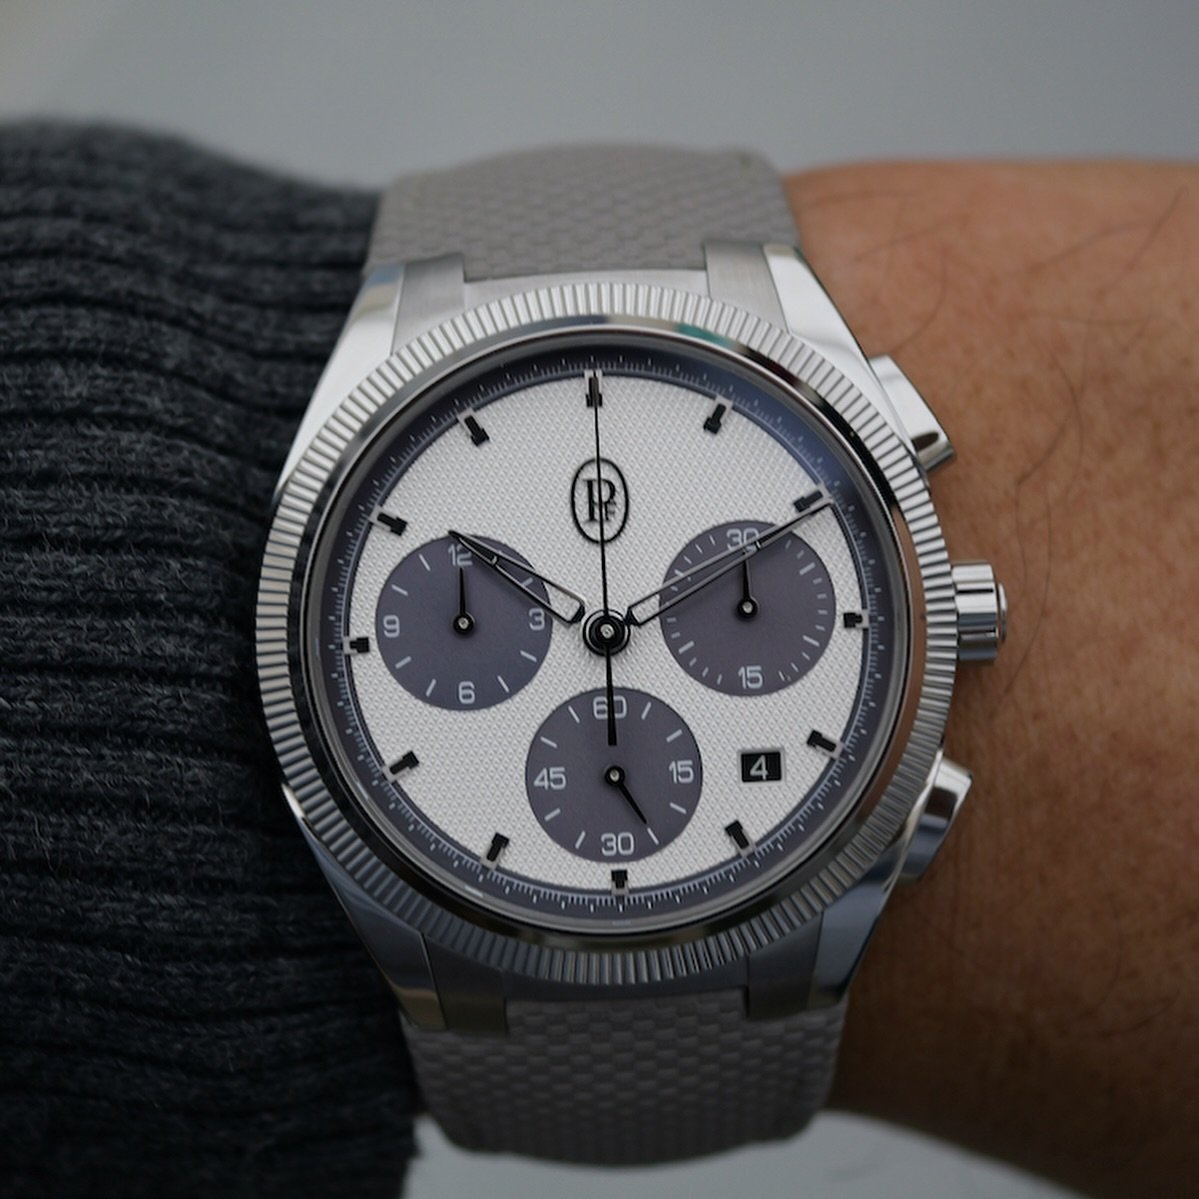 Presenting a perfect addition for the summer, the new @parmigianifleurier Tonda PF Sport Chronograph in stainless steel. This new collection seamlessly marries horological precision with a refined, sporty aesthetic, tailored to those who appreciate b